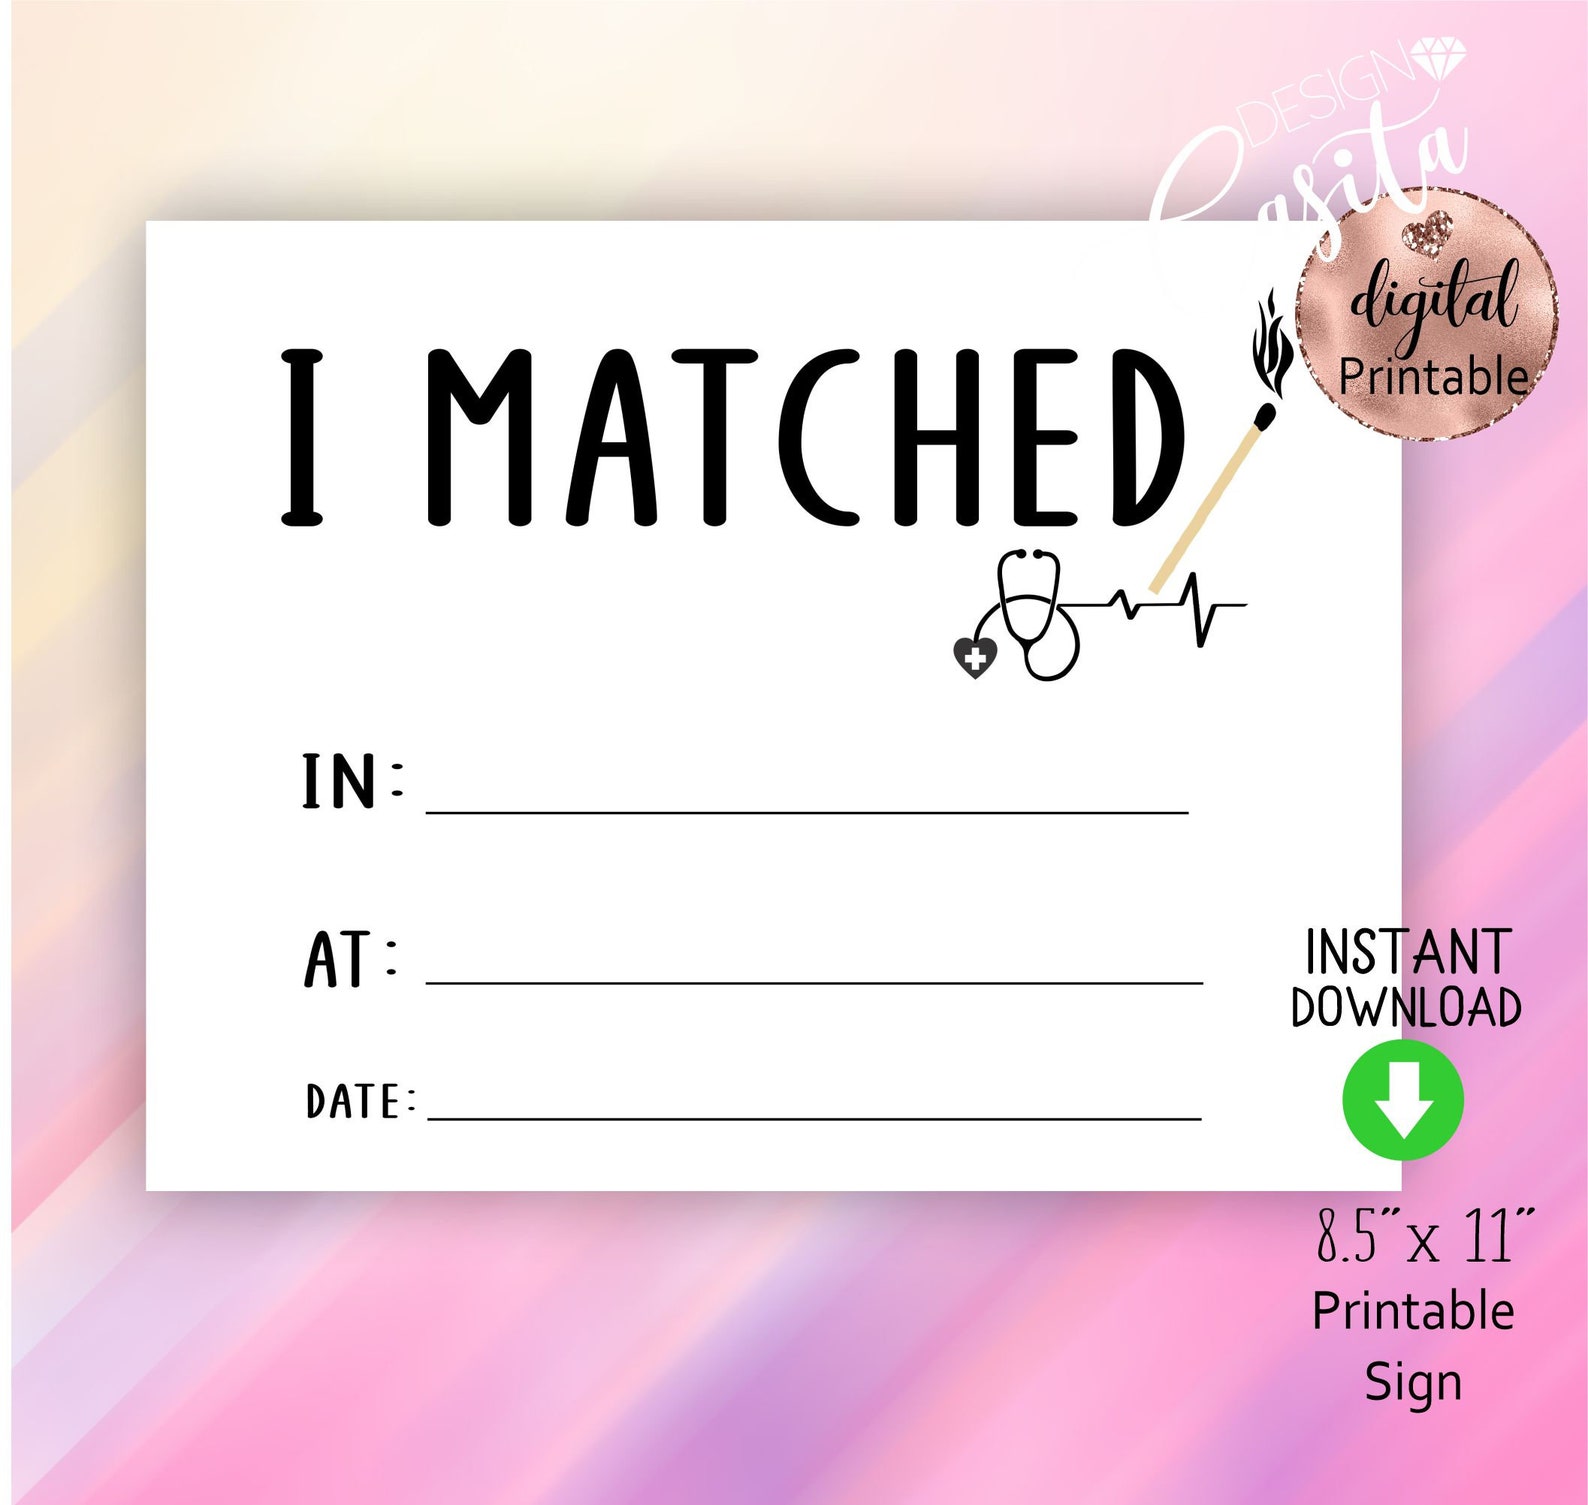 Match Day Residency 8.5x11 Printable Sign Medical Specialty Etsy